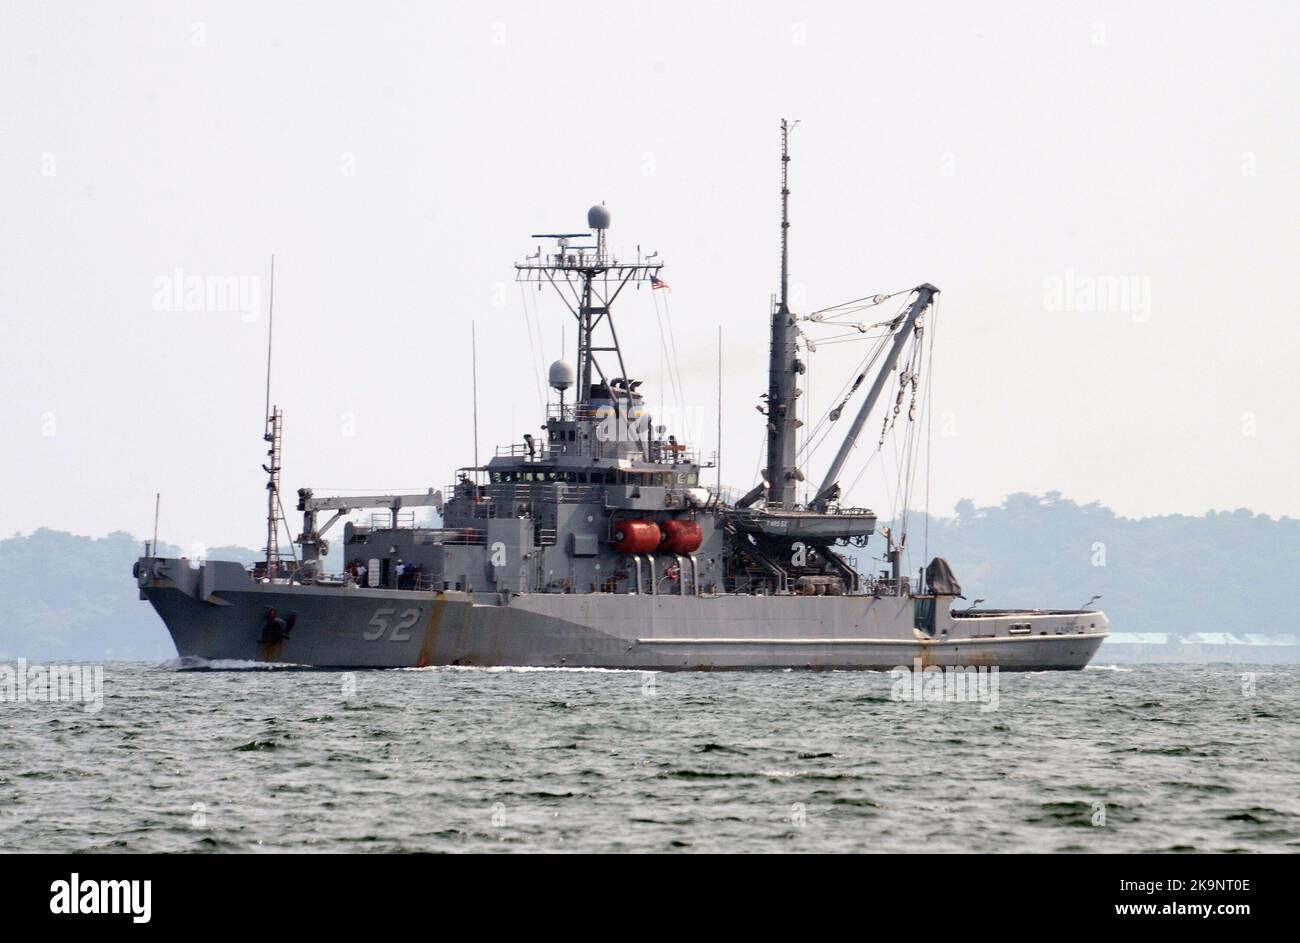 The Military Sealift Command diving and salvage vessel USNS Salvor (T-ARS 52) Stock Photo